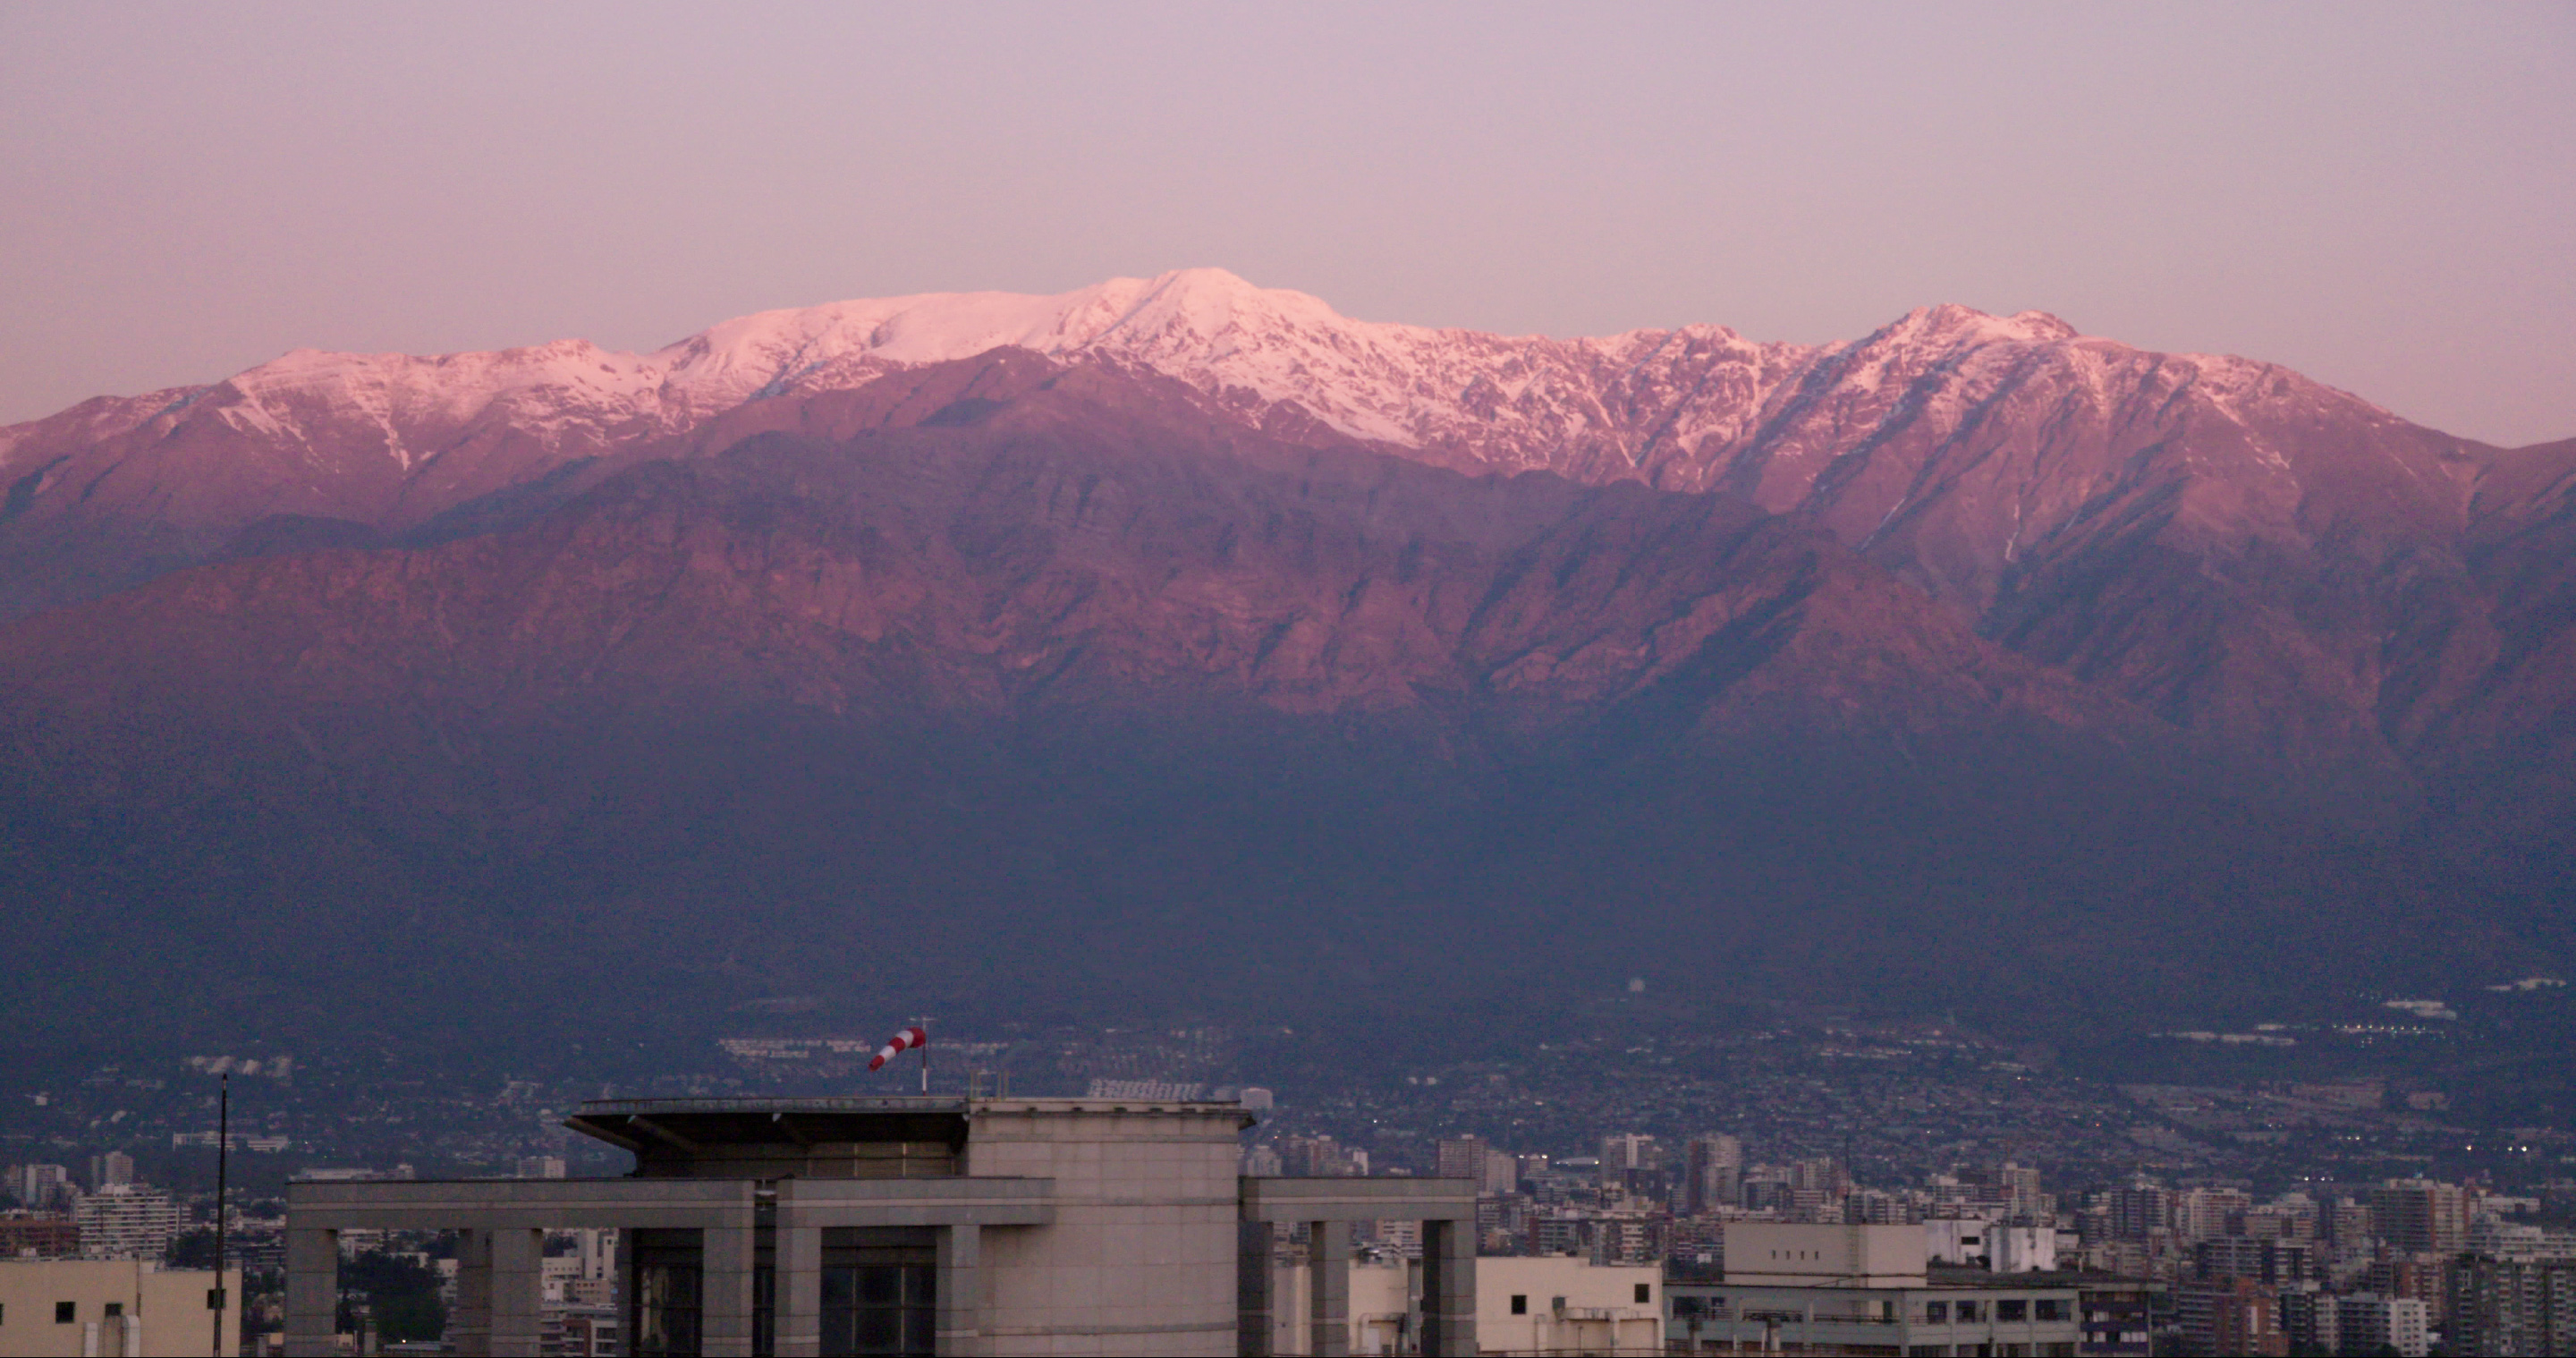 THE CORDILLERA OF DREAMS (still image of a snow-topped mountain range behind the buildings of a city)